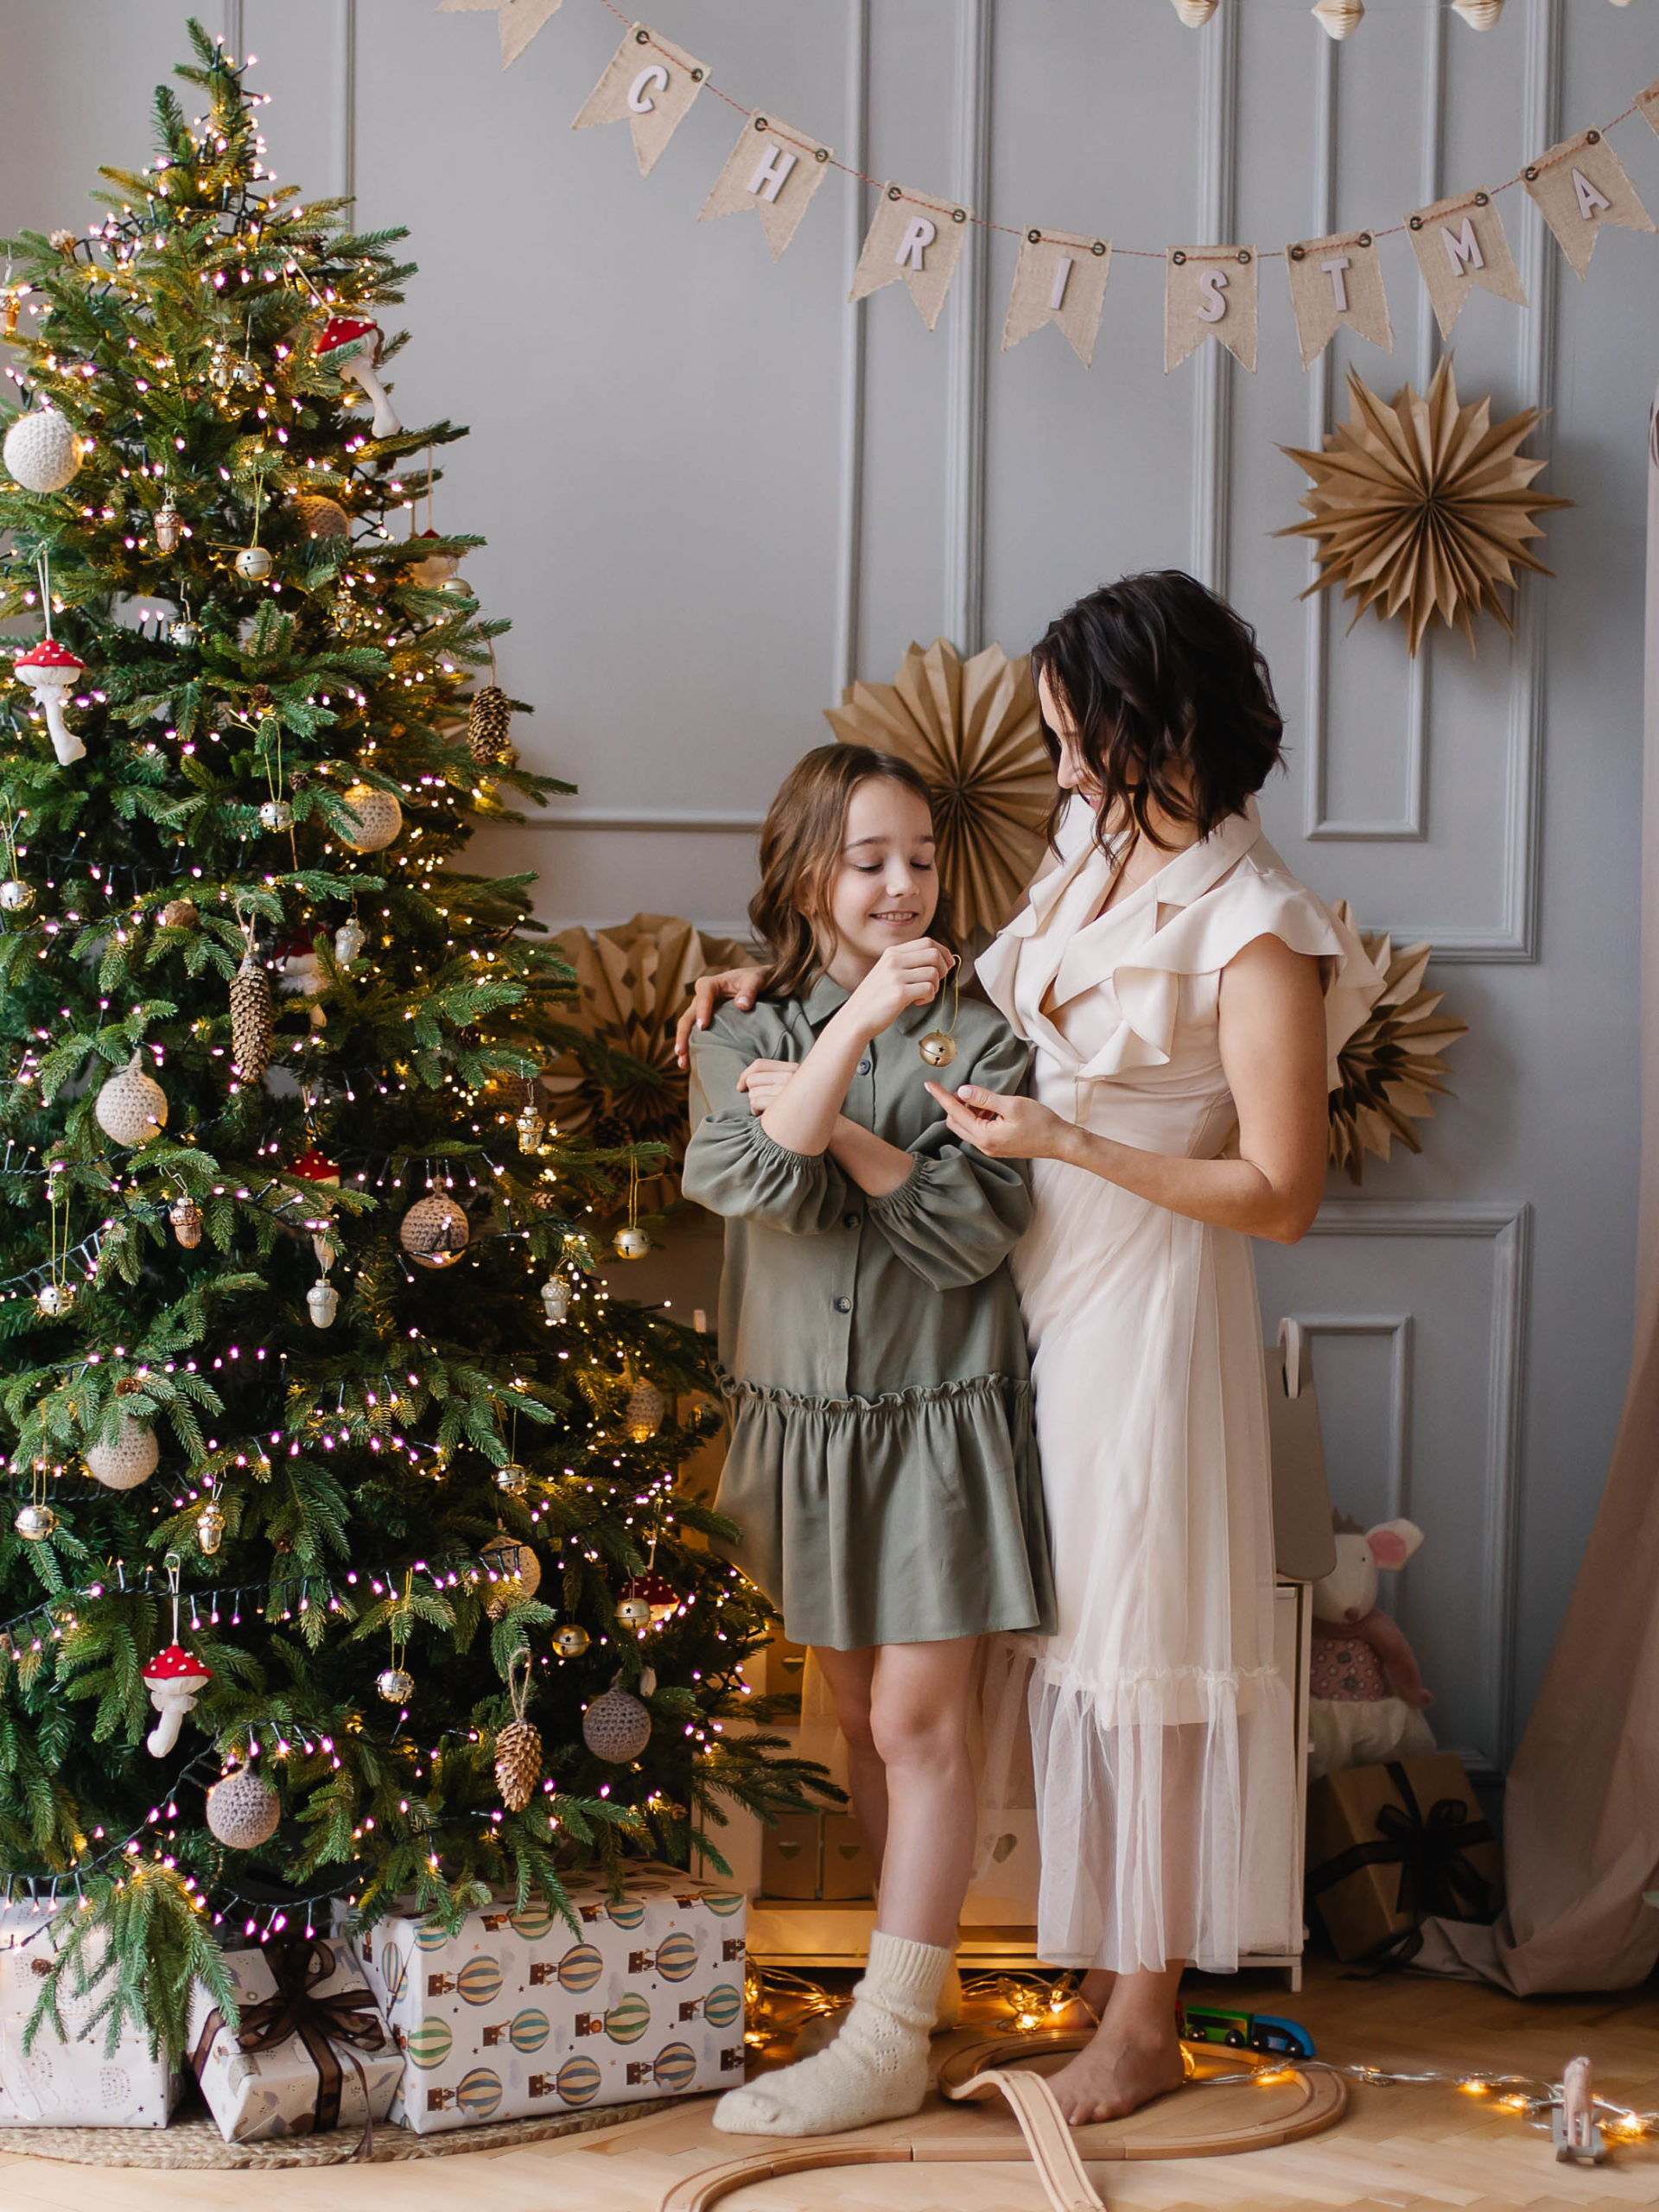 Mother and daughter decorate the Christmas tree together